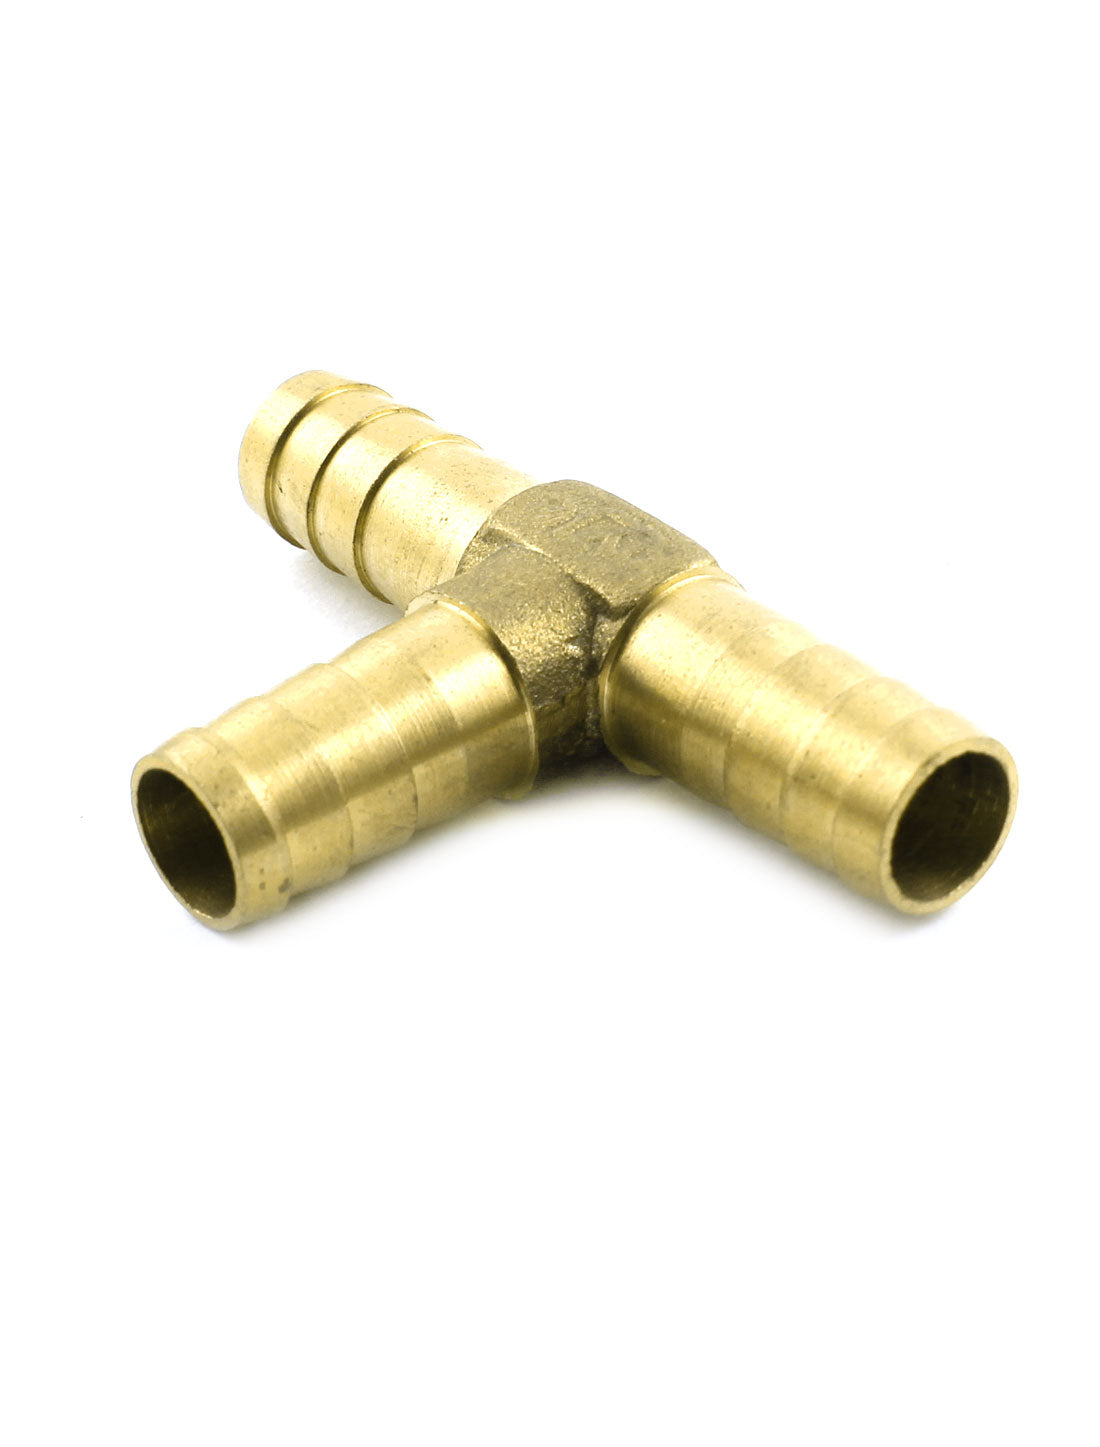 uxcell Uxcell 10mm Dia T Piece Air Water Fuel Brass Hose Joiner Tee Pipe Tube Fitting Connector 51 x 32mm(L xH)